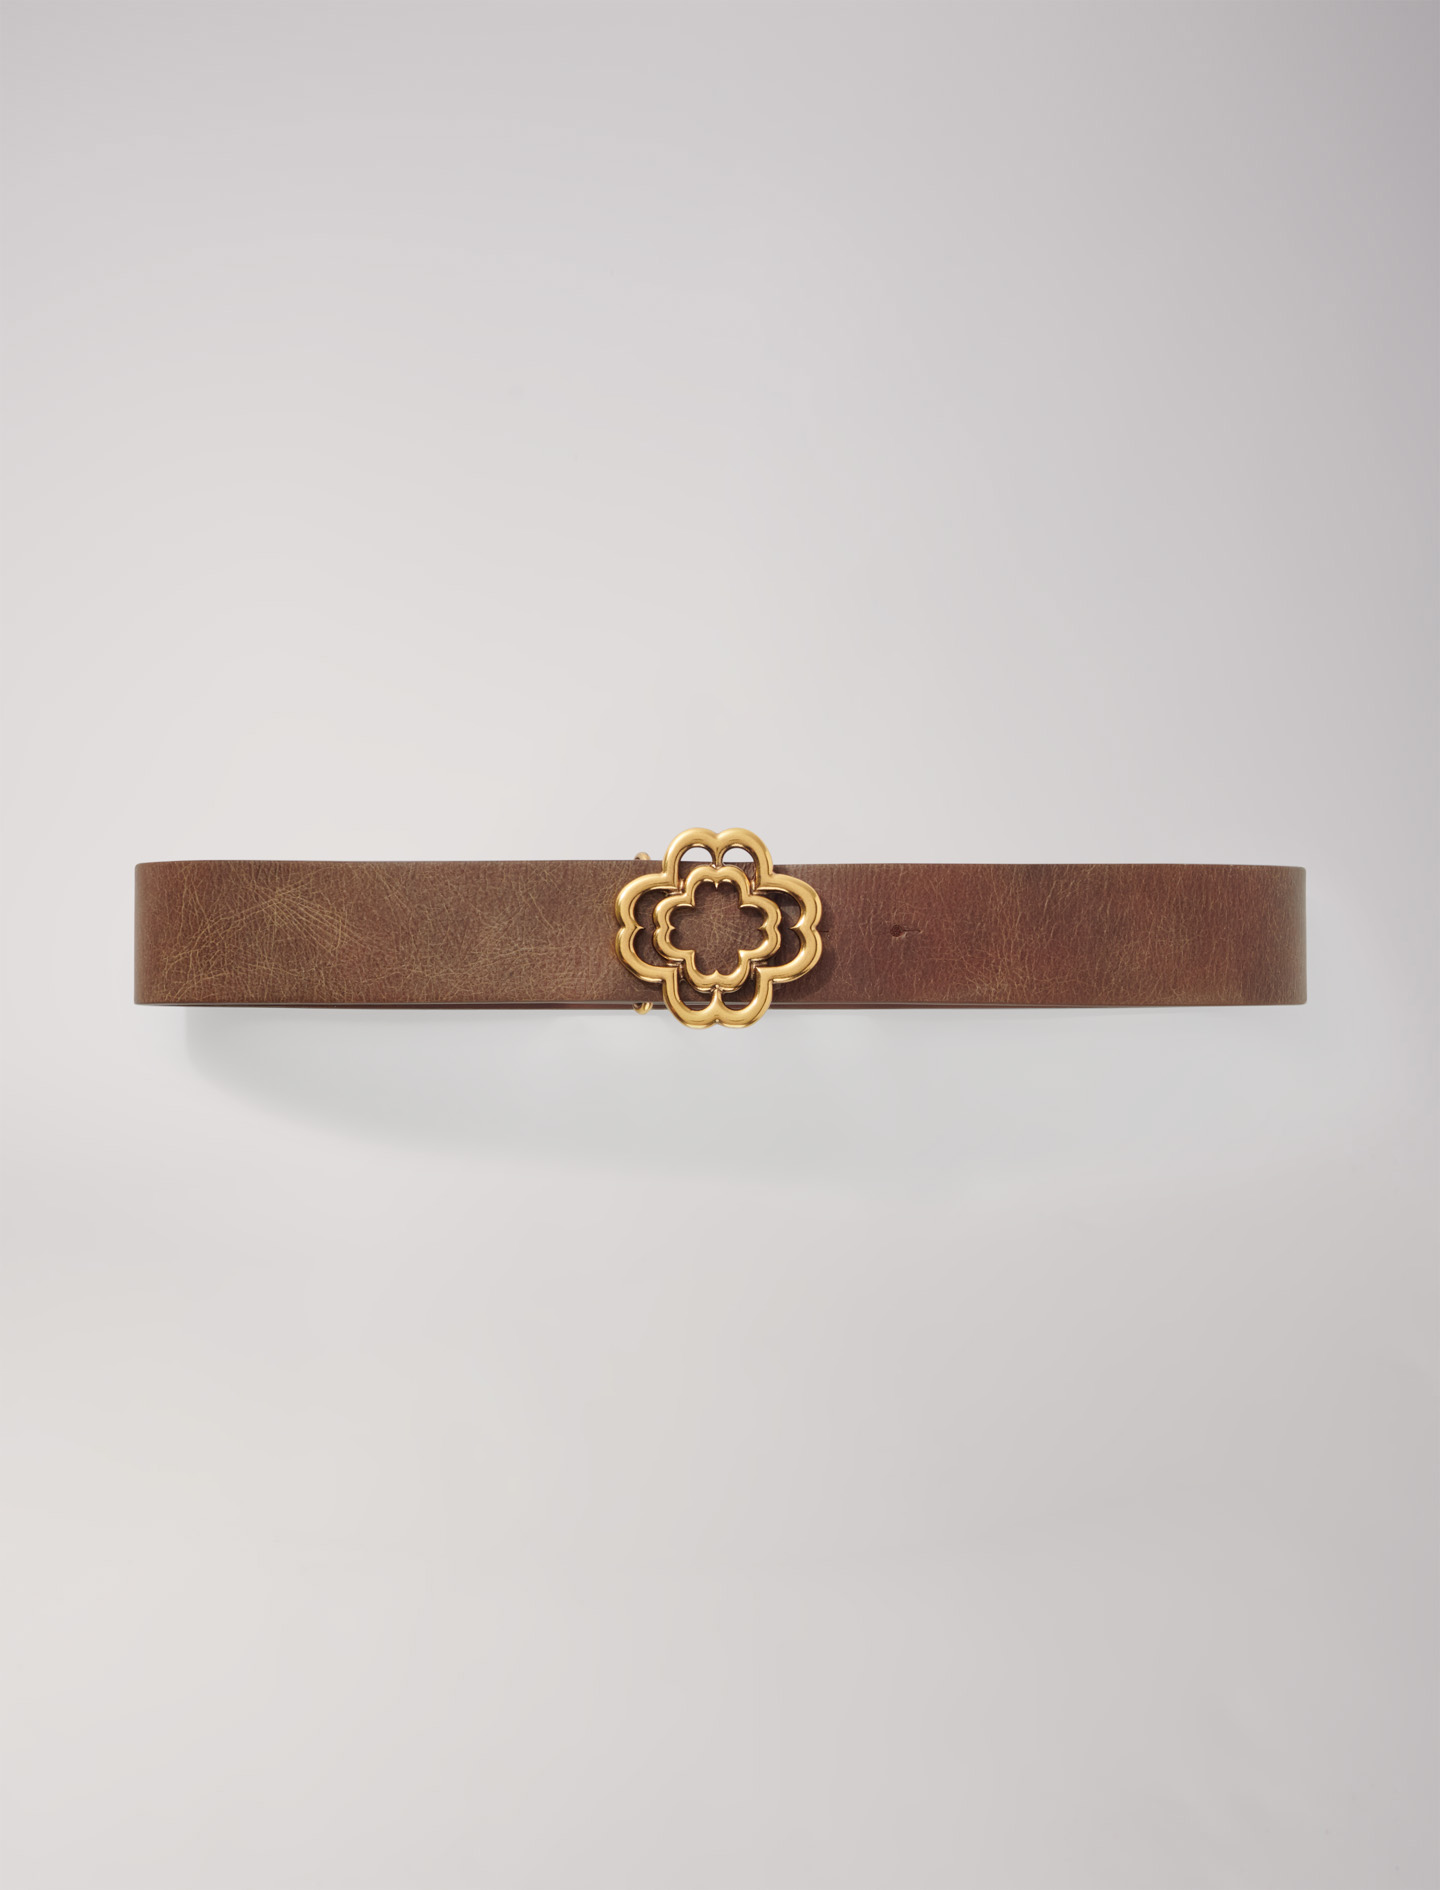 Maje Woman's polyester, Distressed leather Clover belt for Spring/Summer, in color Old Brown /